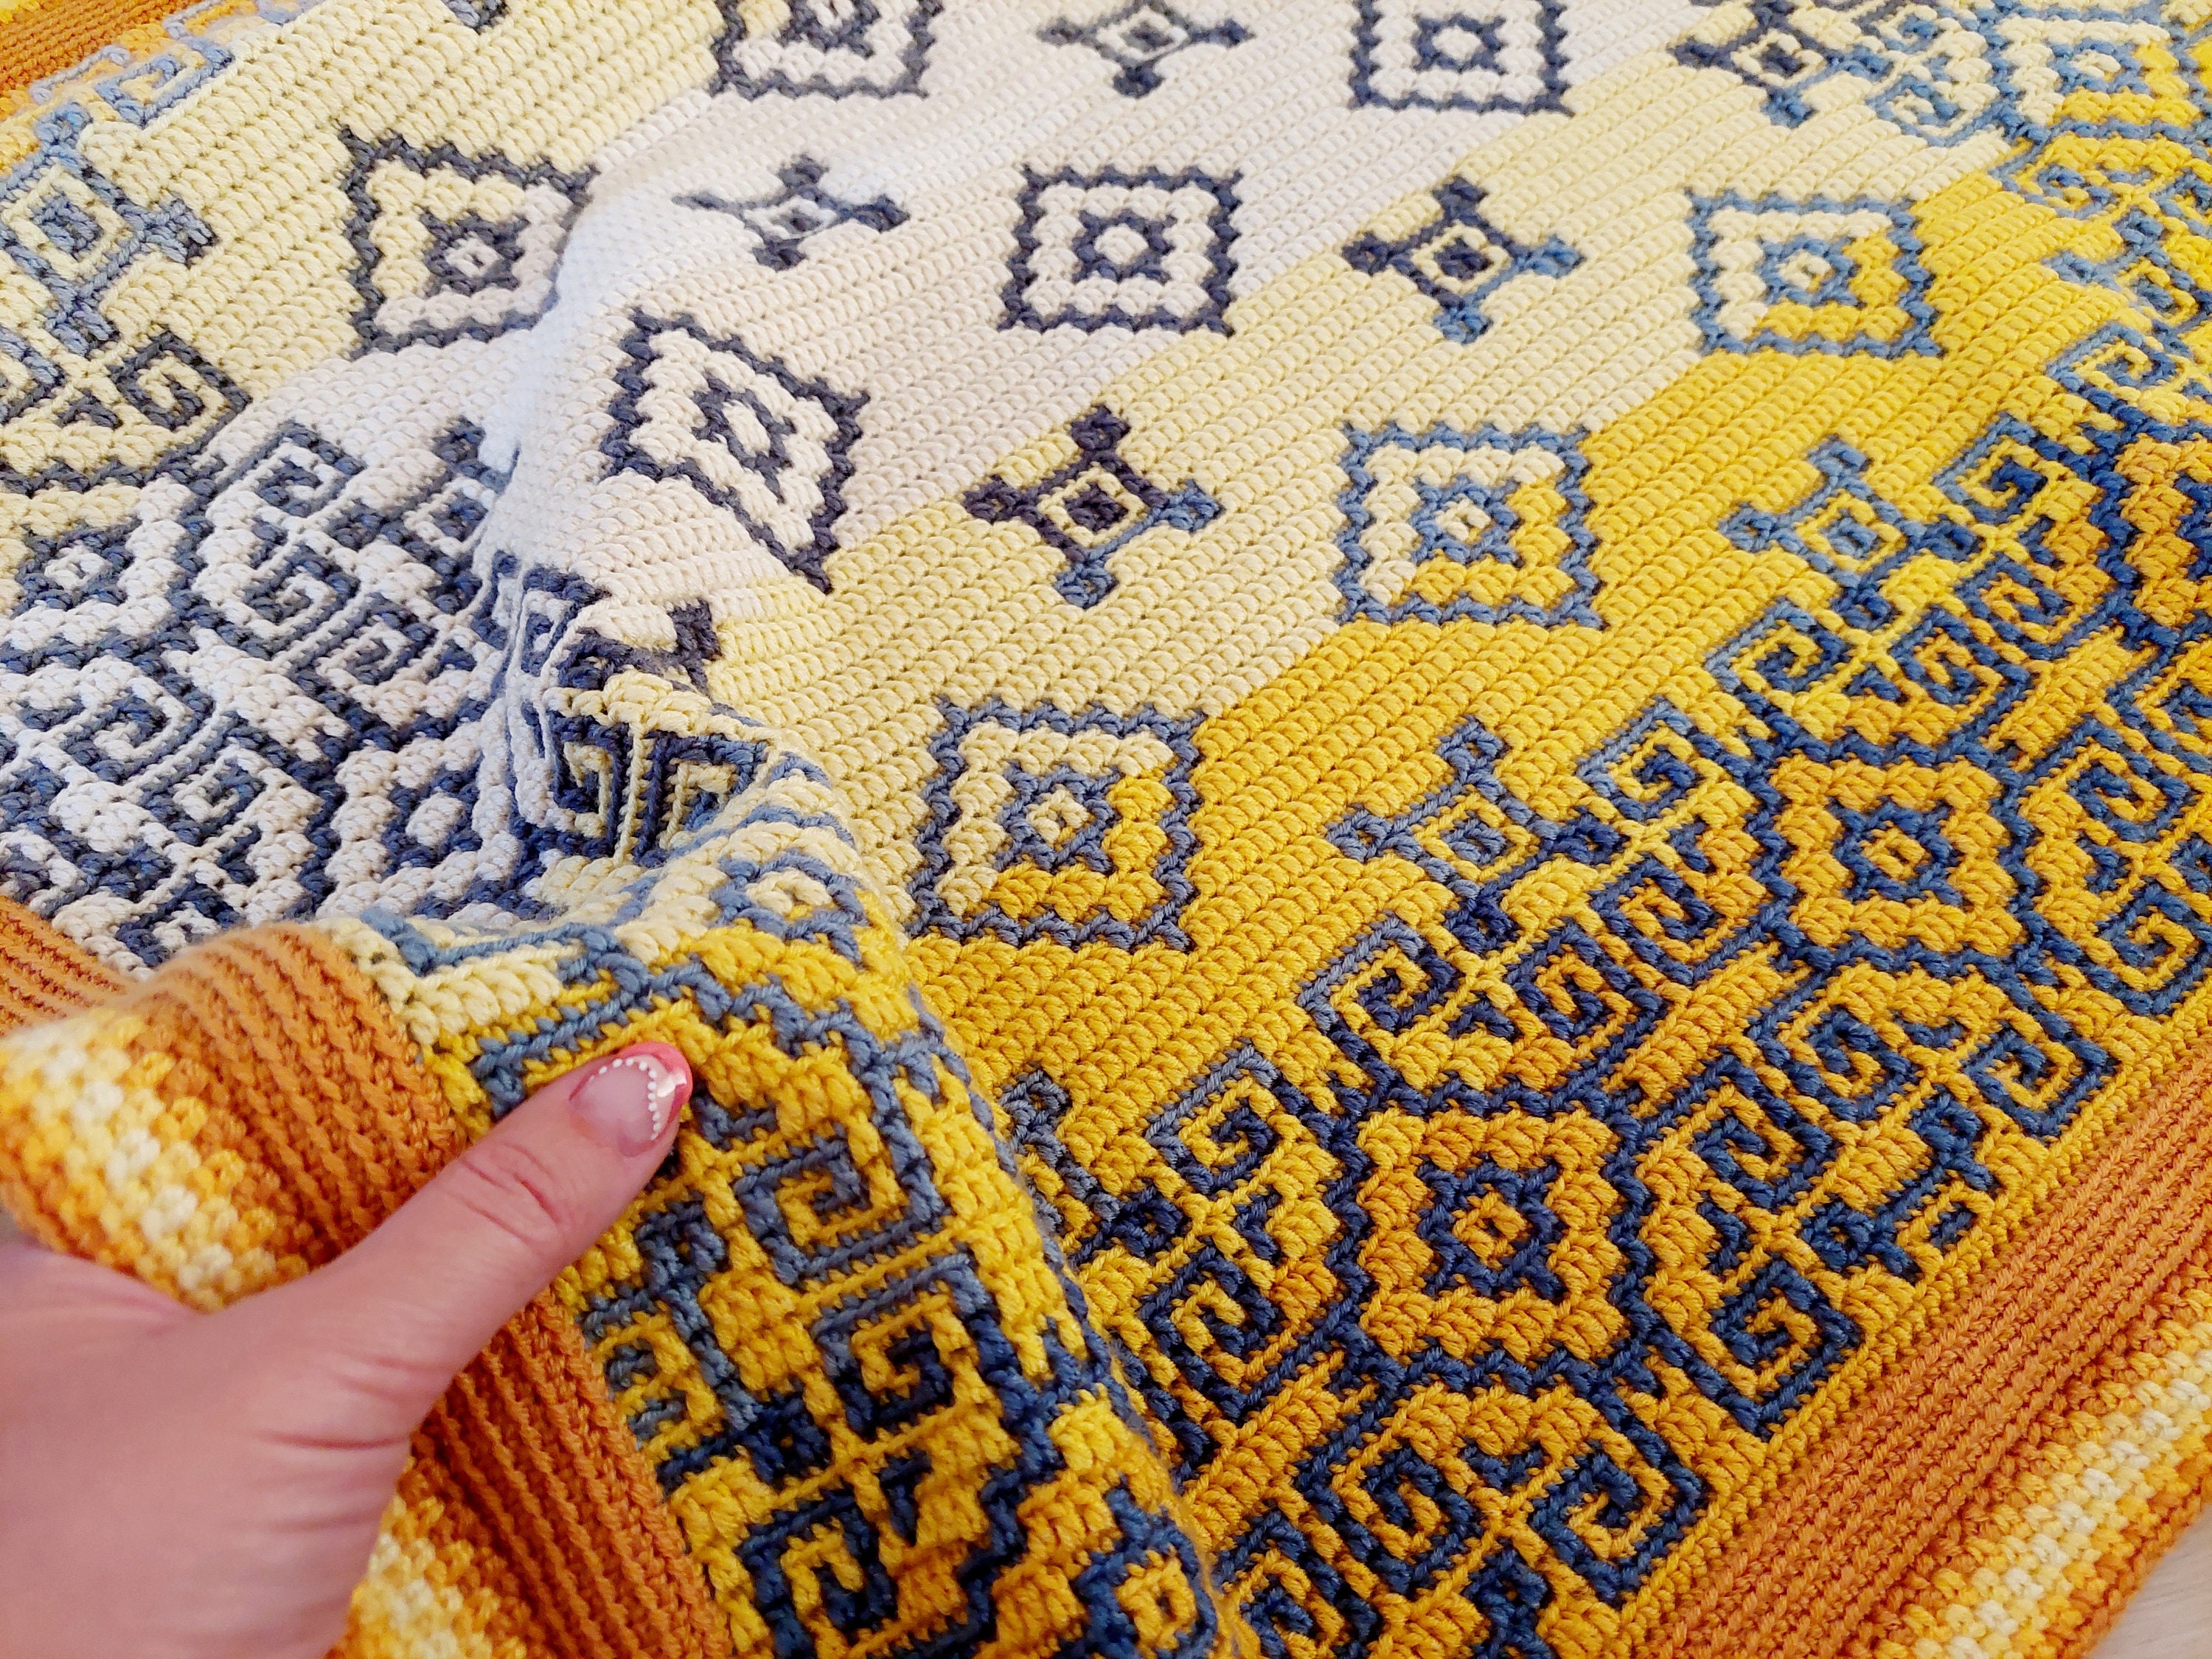 No Right Or Wrong. Two-sided overlay mosaic crochet